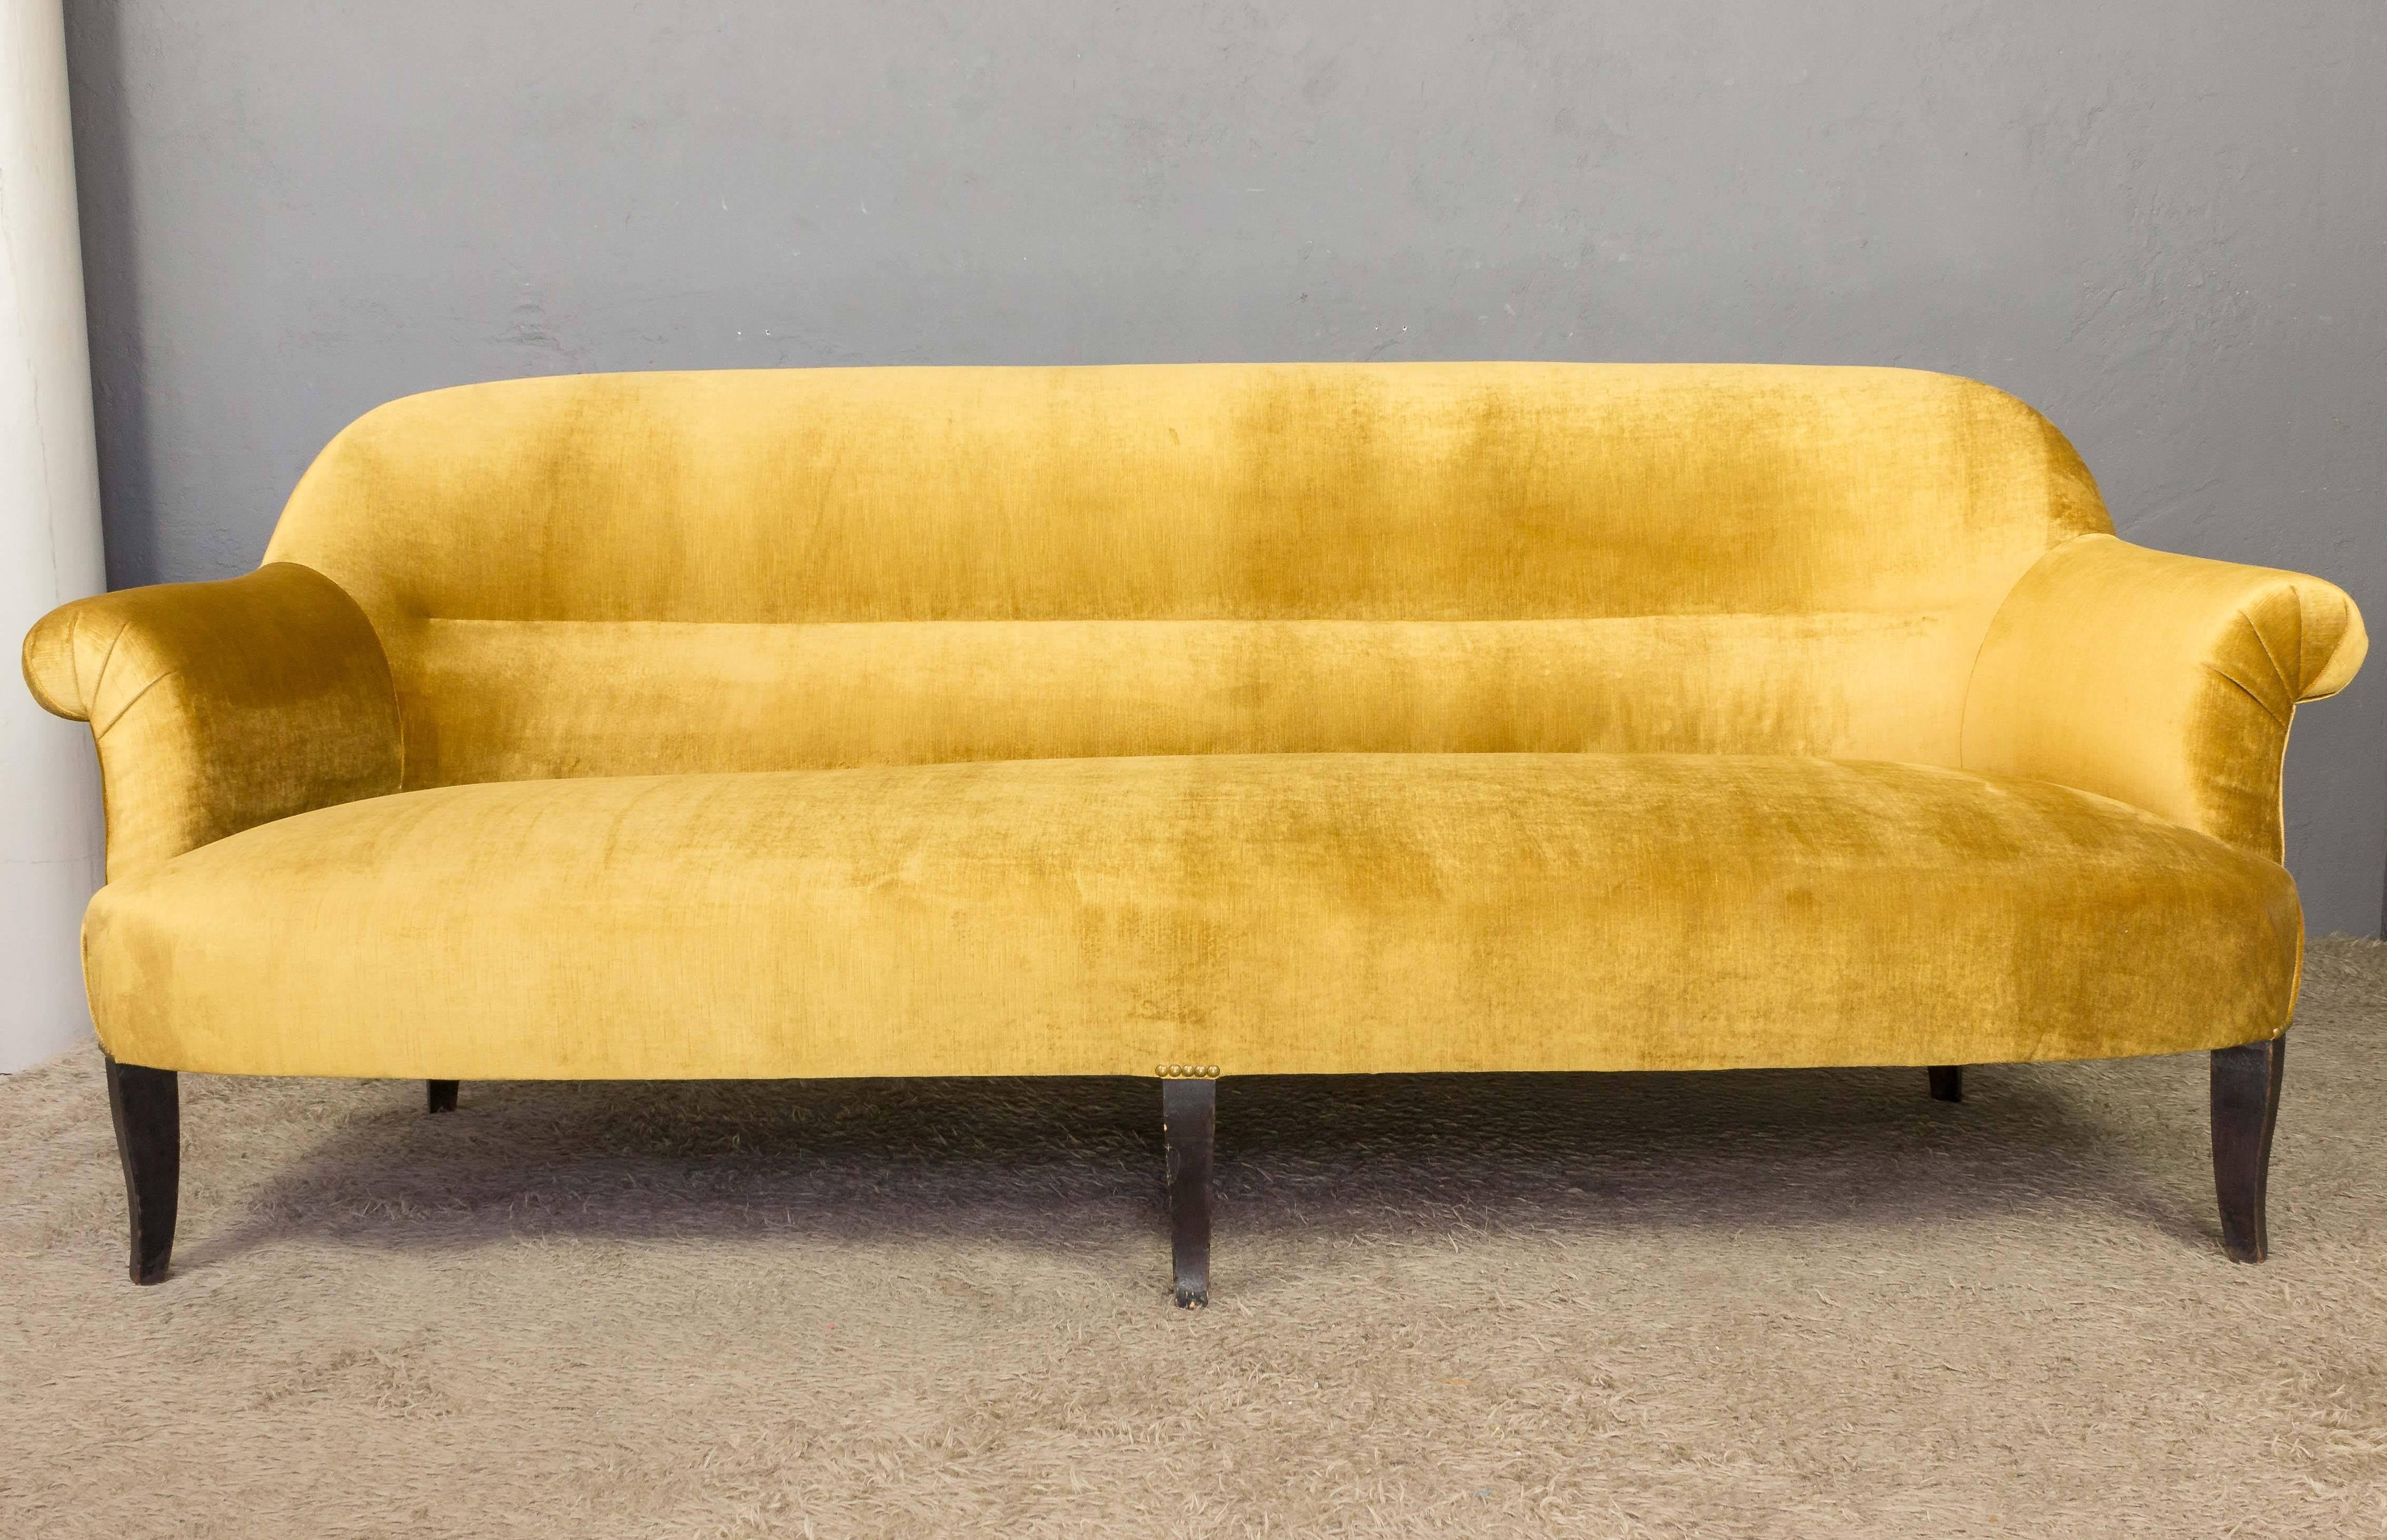 Wonderful French settee, most likely made circa 1900. The gracious curved back has lumbar supports and rolled arms. The settee has as additional front leg for extra stability, and has been reupholstered with gold velvet.